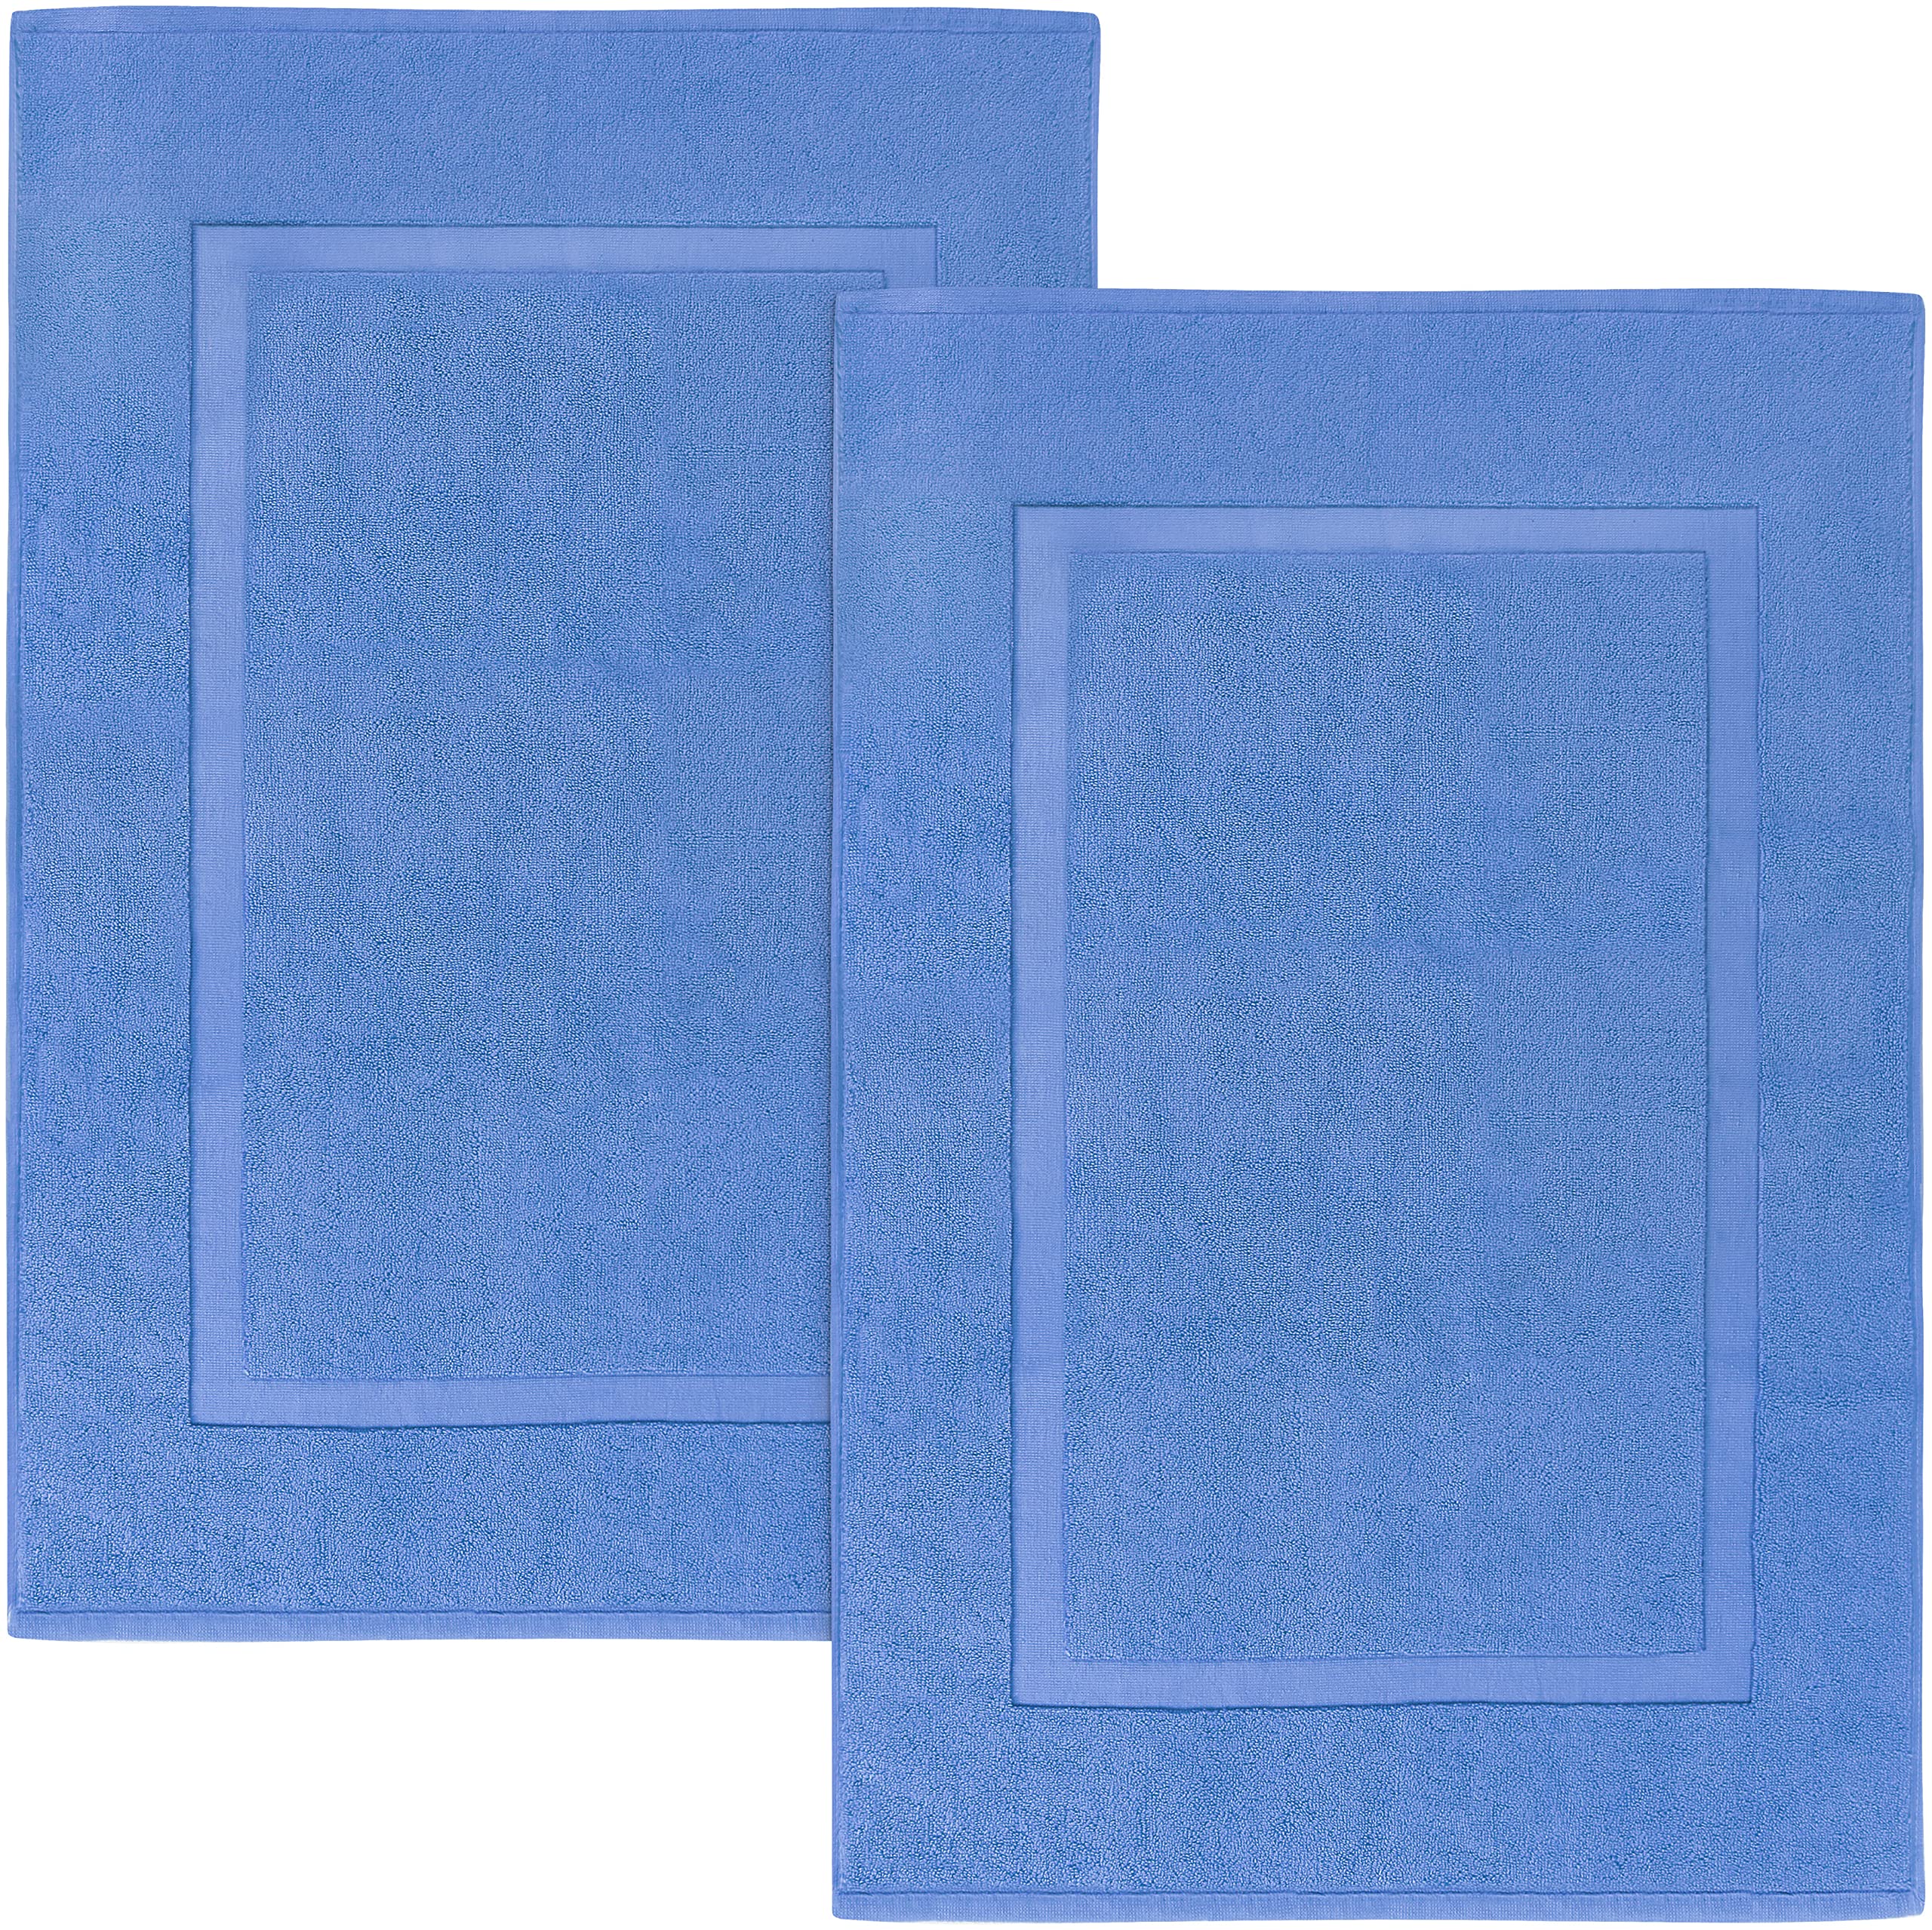 Book Cover Utopia Towels - Cotton Banded Rug, Bath Mats, [Not a Bathroom Rug], 21x34 Inches, 100% Ring Spun Cotton - Highly Absorbent and Machine Washable Shower Bathroom Floor Mat, Electric Blue, 2 Pack 2 Pack Electric Blue